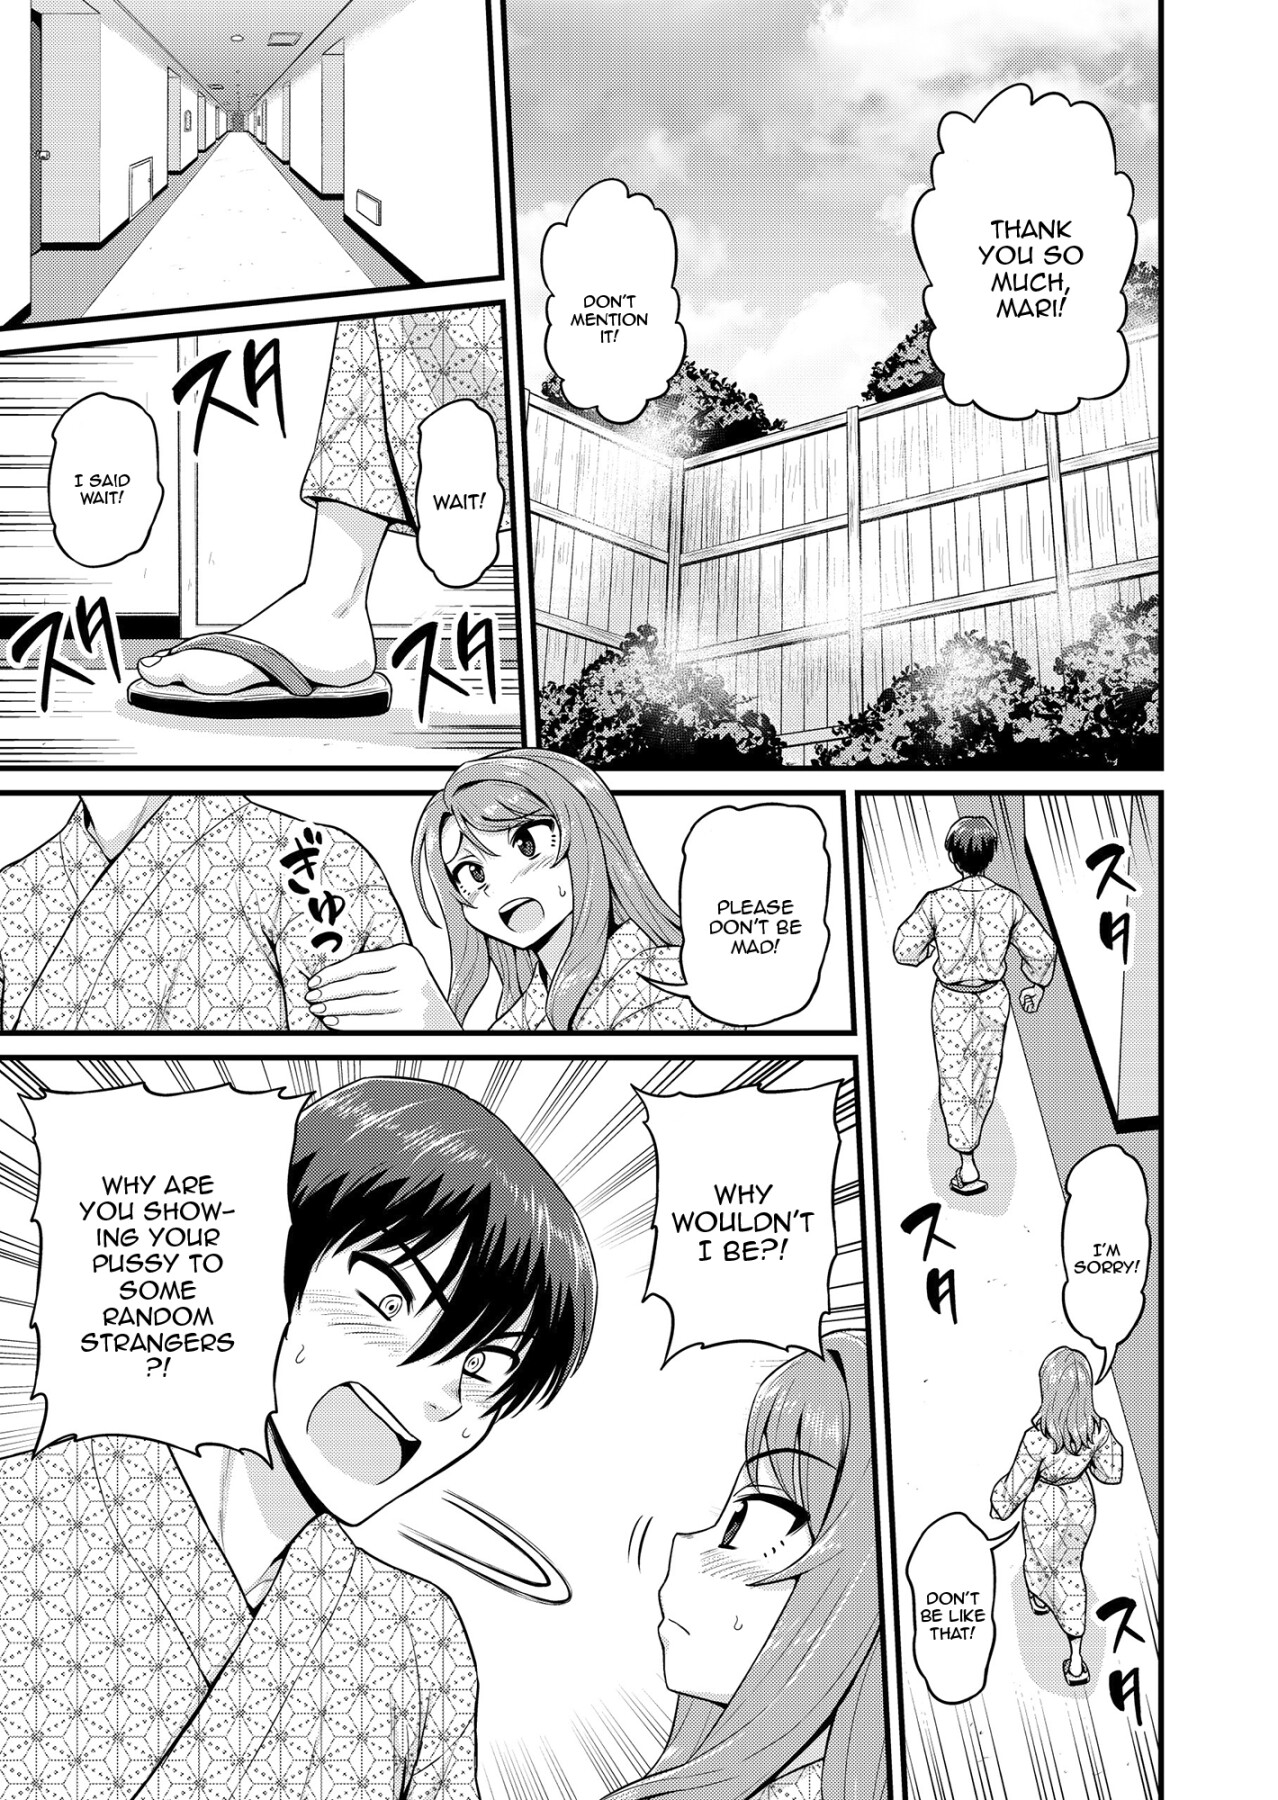 hentai manga A Story About Fucking with A Friend from a Game in a Trip to a Hot Springs Resort